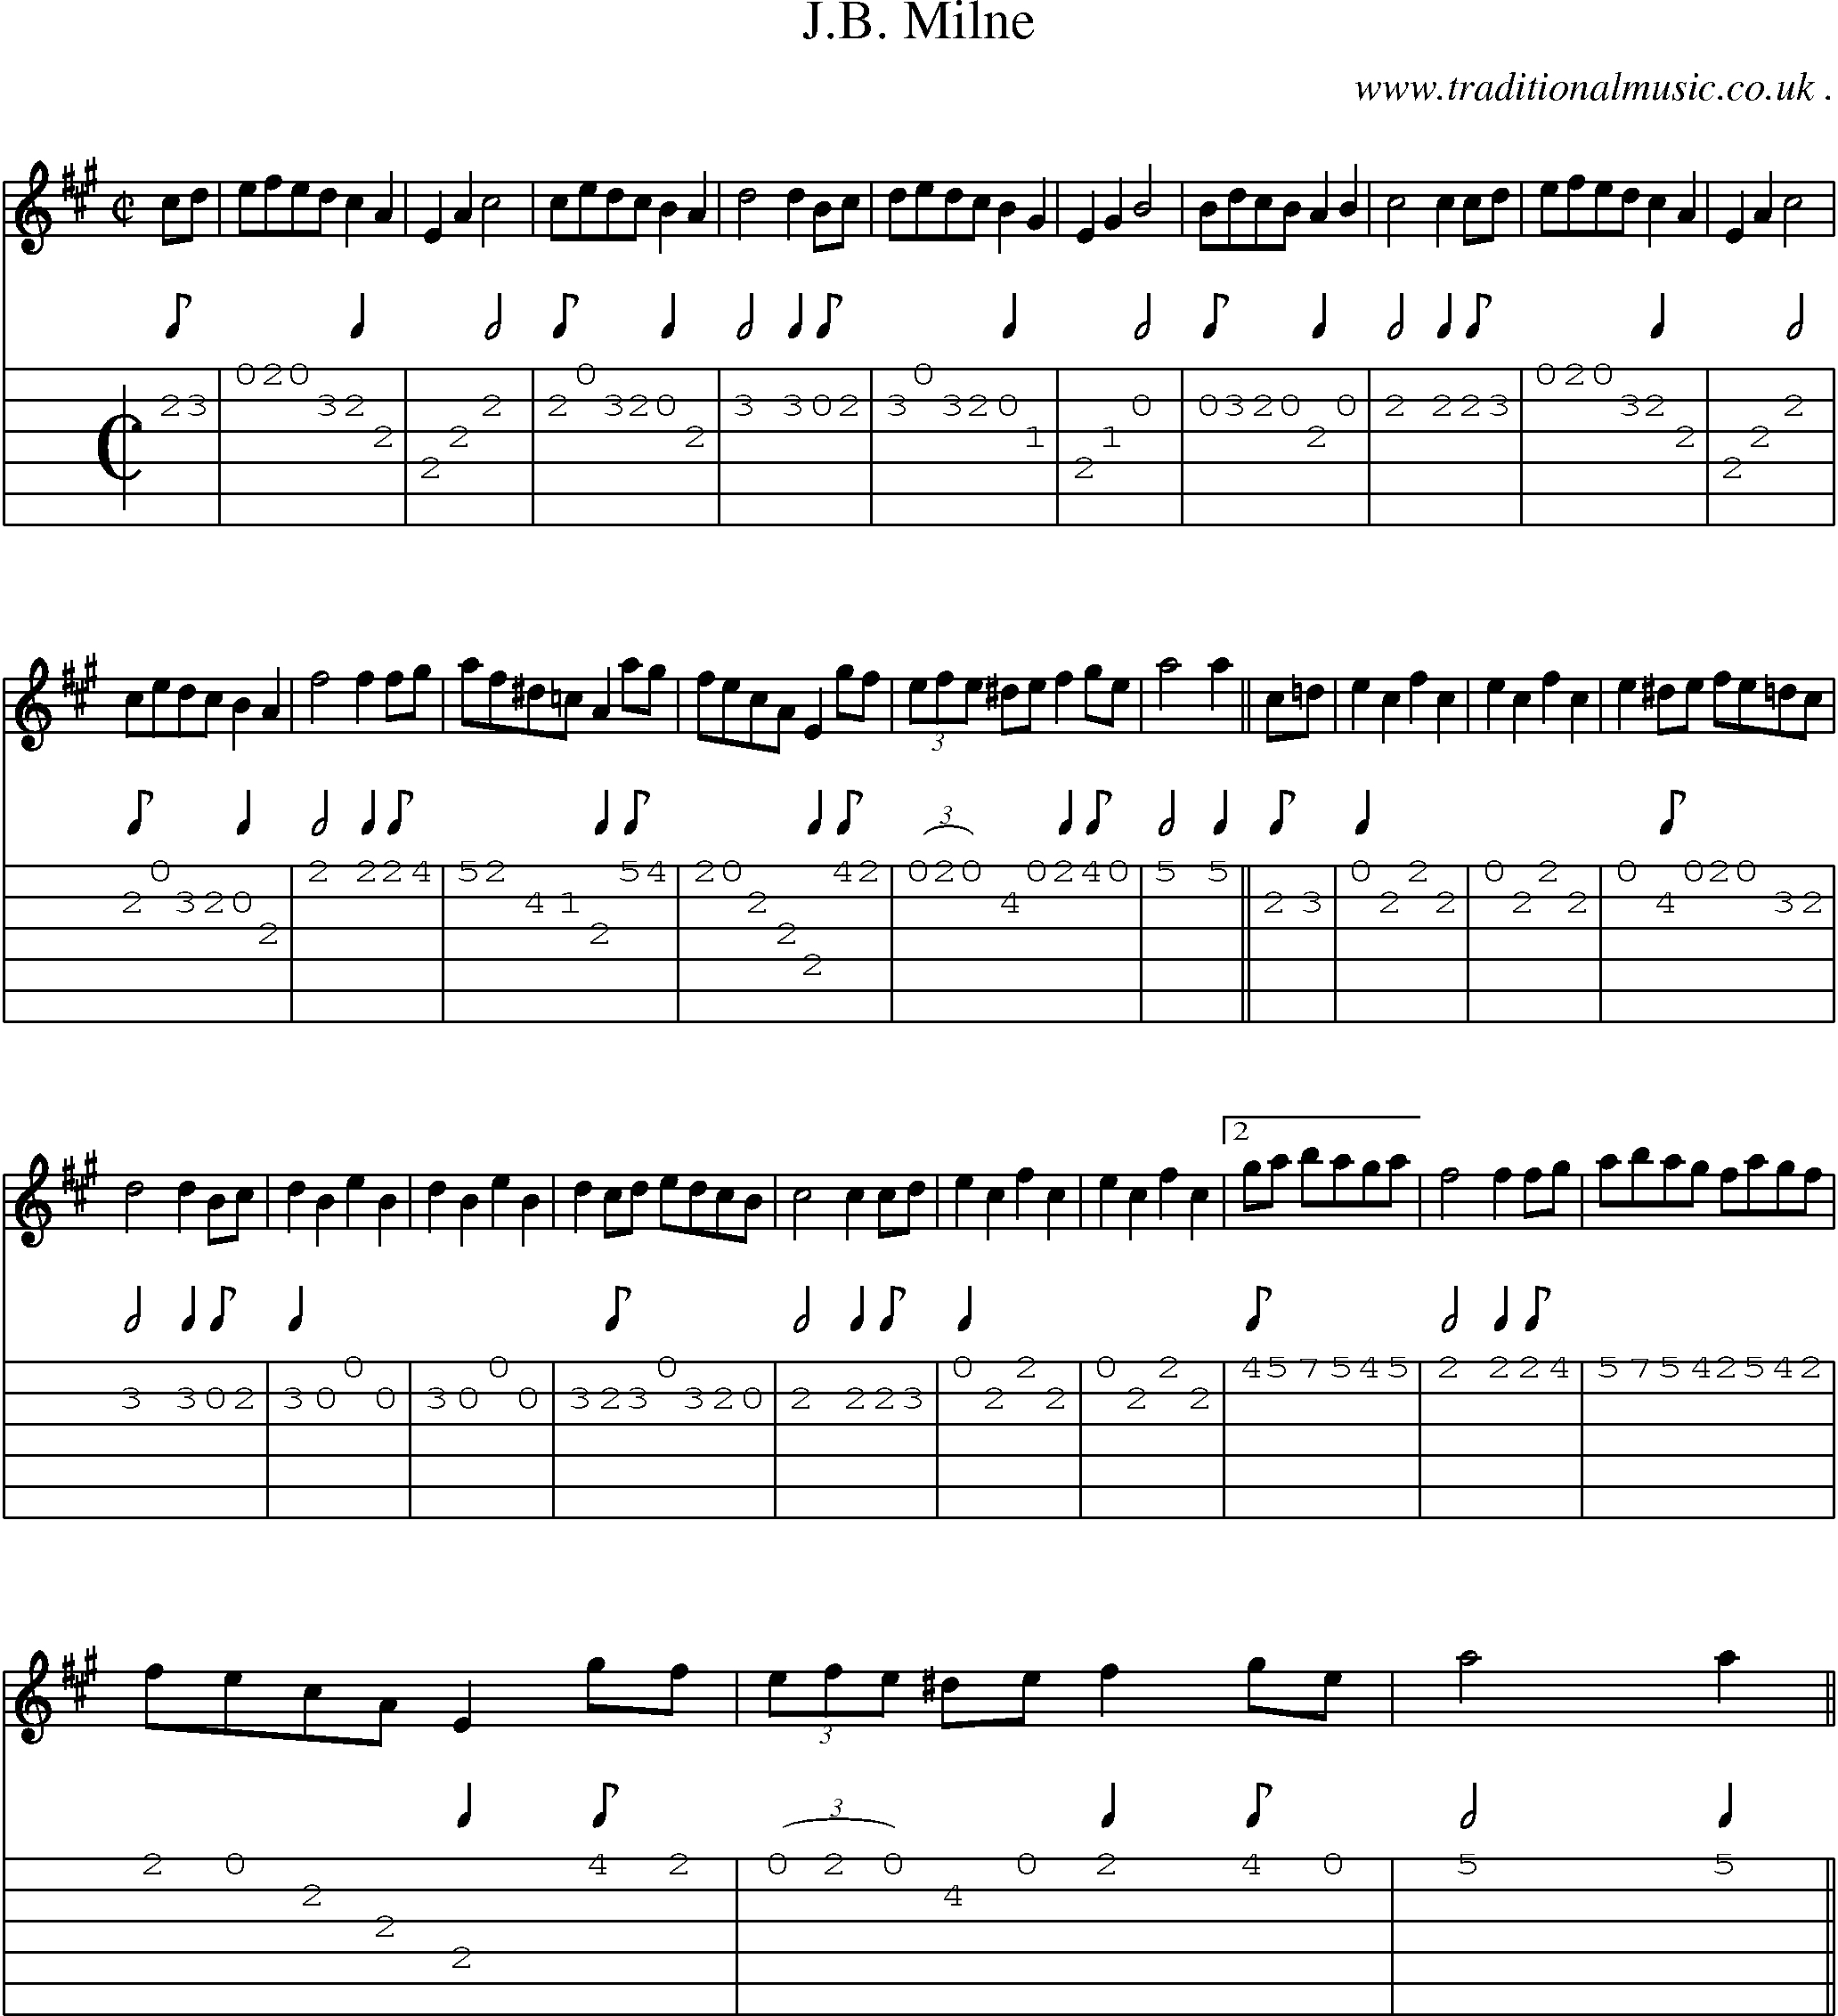 Sheet-music  score, Chords and Guitar Tabs for Jb Milne